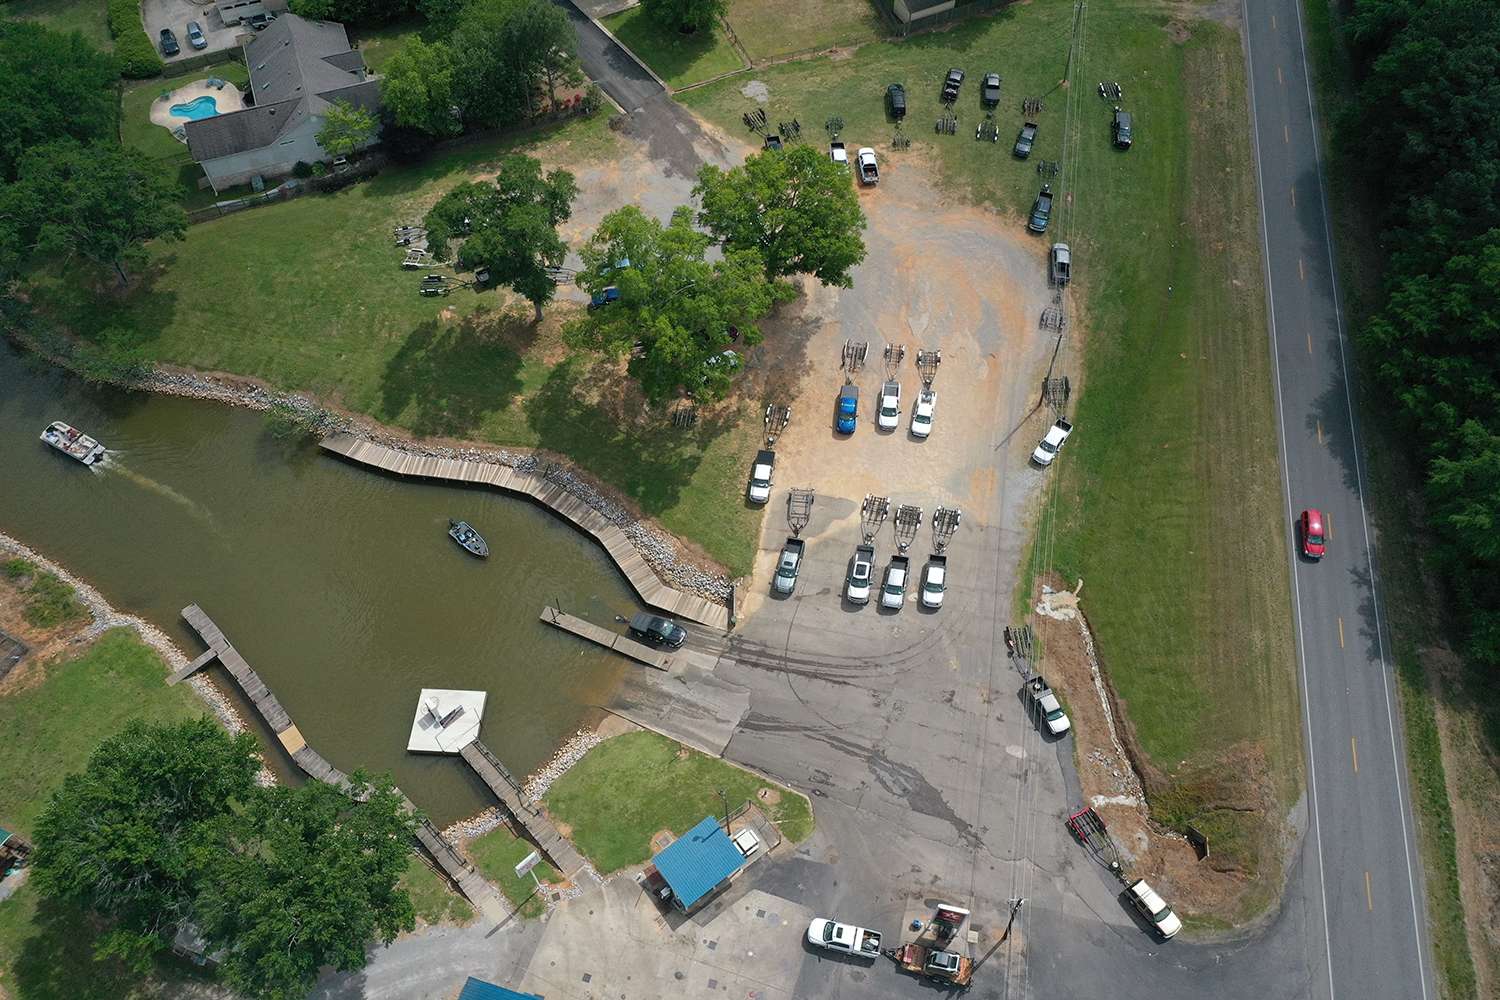 Moving down Logan Martin, here is a view of the Town & Country ramp. There are still a good number of tournaments going out of this launch, including afternoon and evening events. 